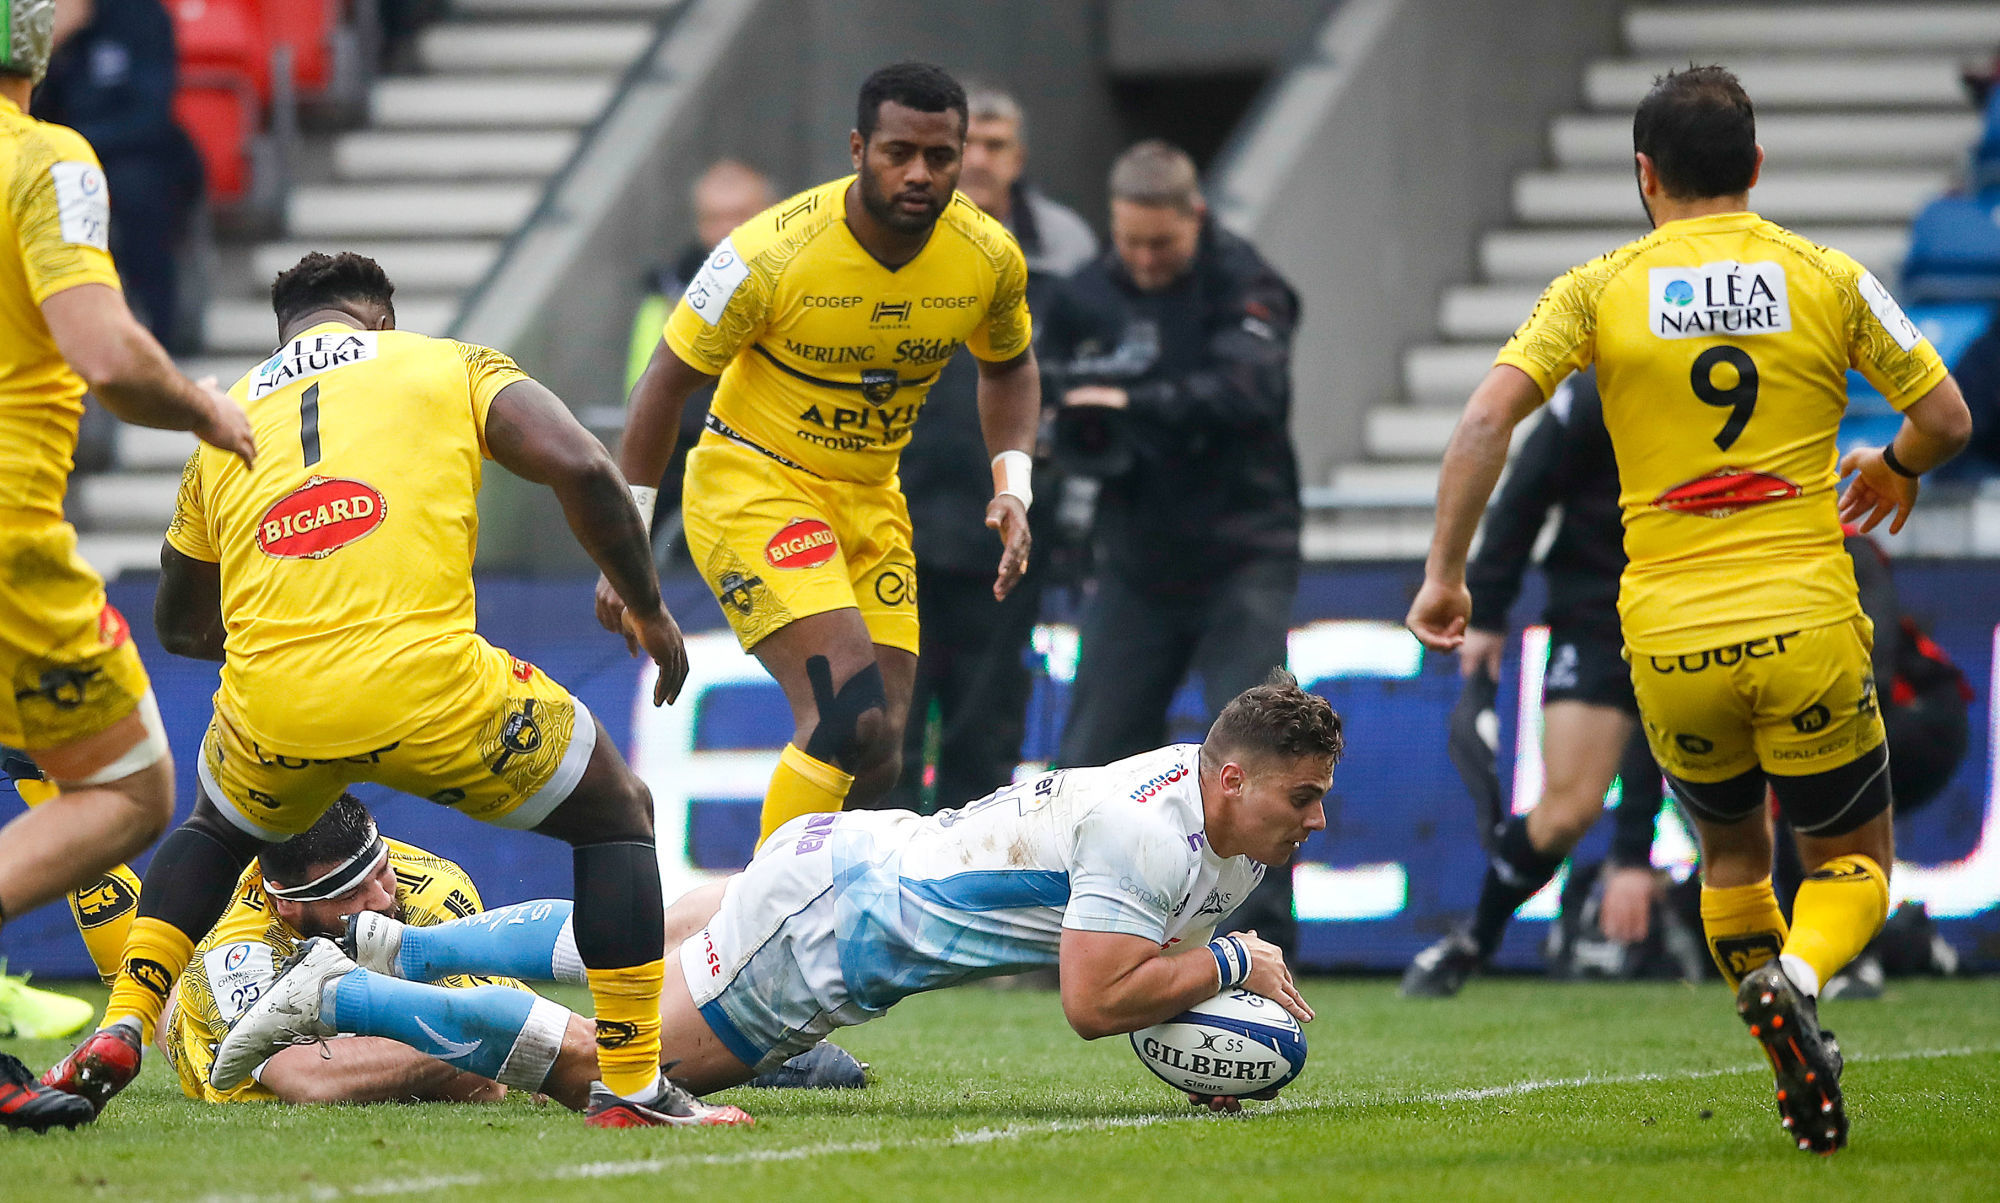 Sale Sharks' Rohan Janse Van Rensburg goes over for a try against La Rochelle, during the Heineken Champions Cup Round 2 match at the AJ Bell Stadium, Salford. 

Photo by Icon Sport - AJ Bell Stadium - Sale (Angleterre)